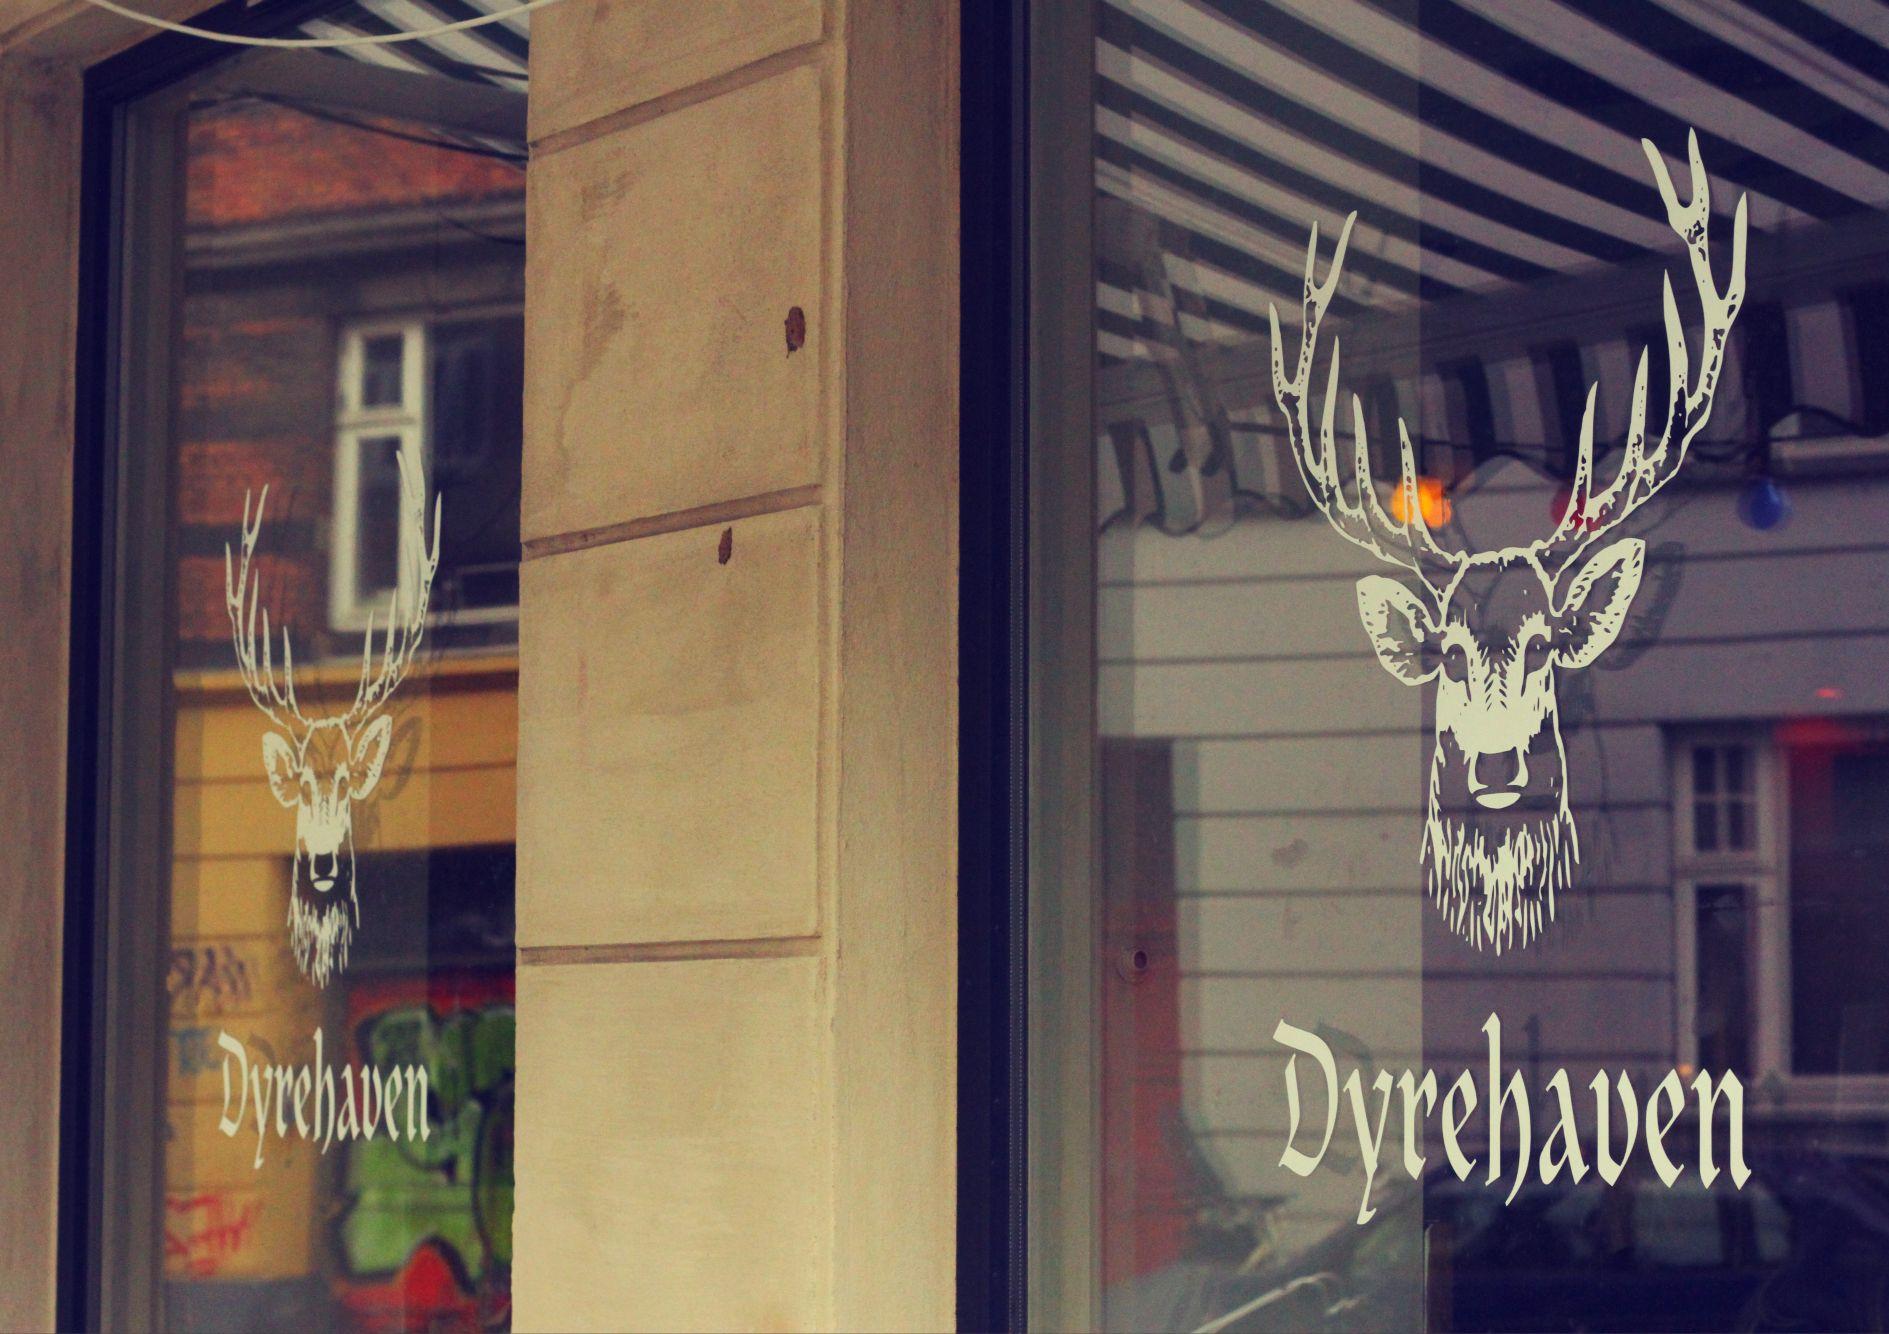 Cover image of this place Cafe Dyrehaven